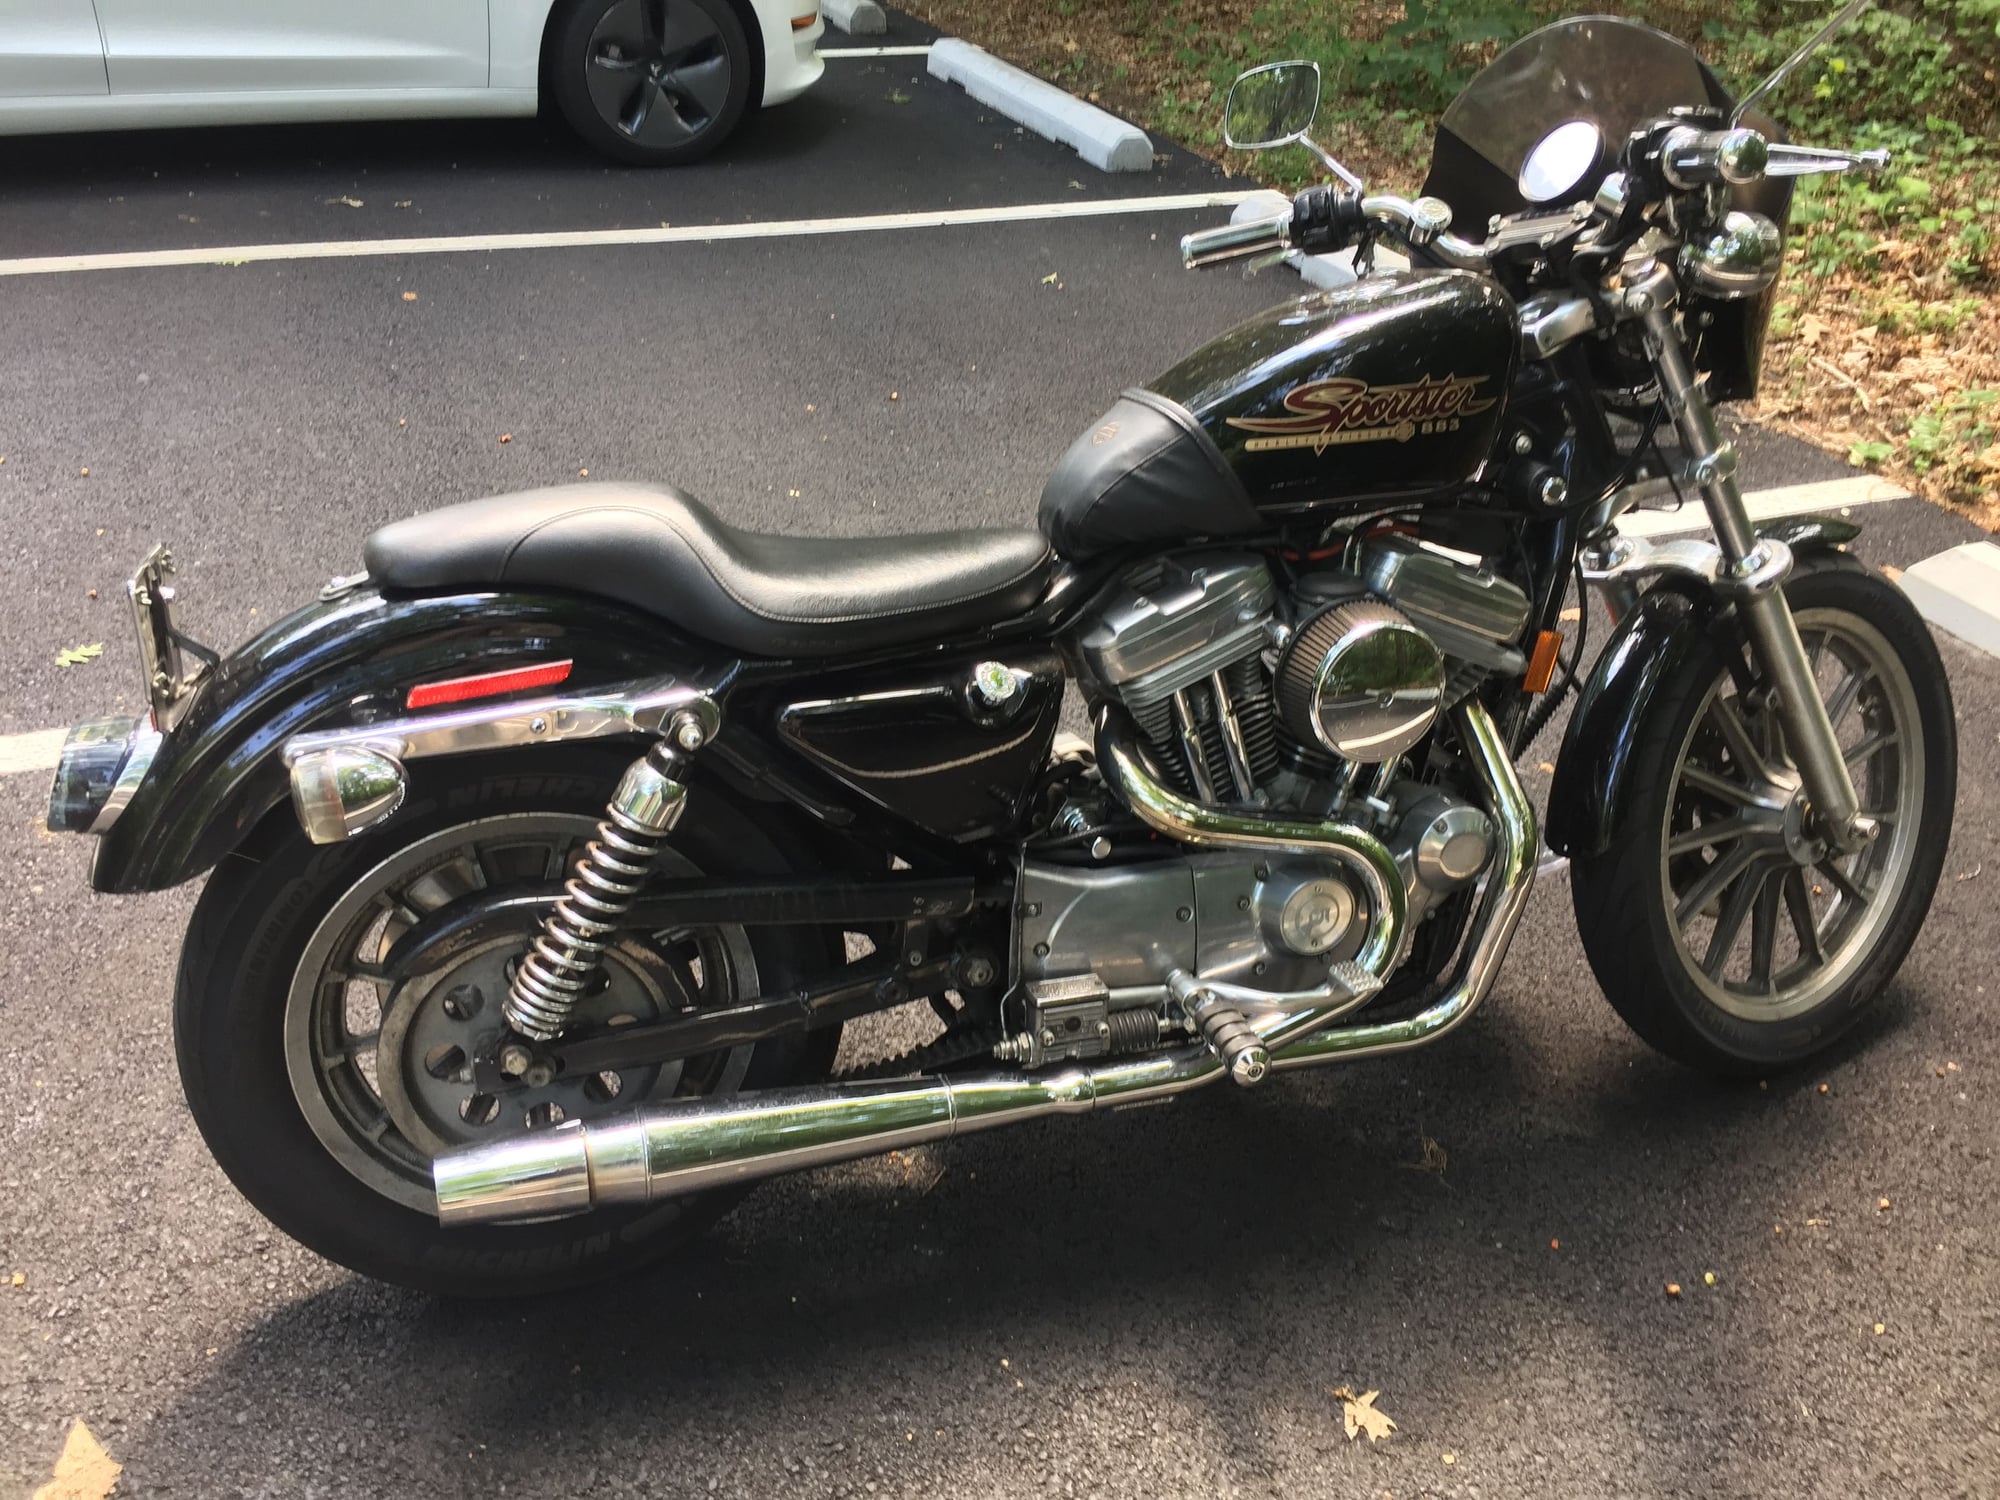 Best 2 into 1 exhaust for Sportster 72? - Page 6 - Harley Davidson Forums